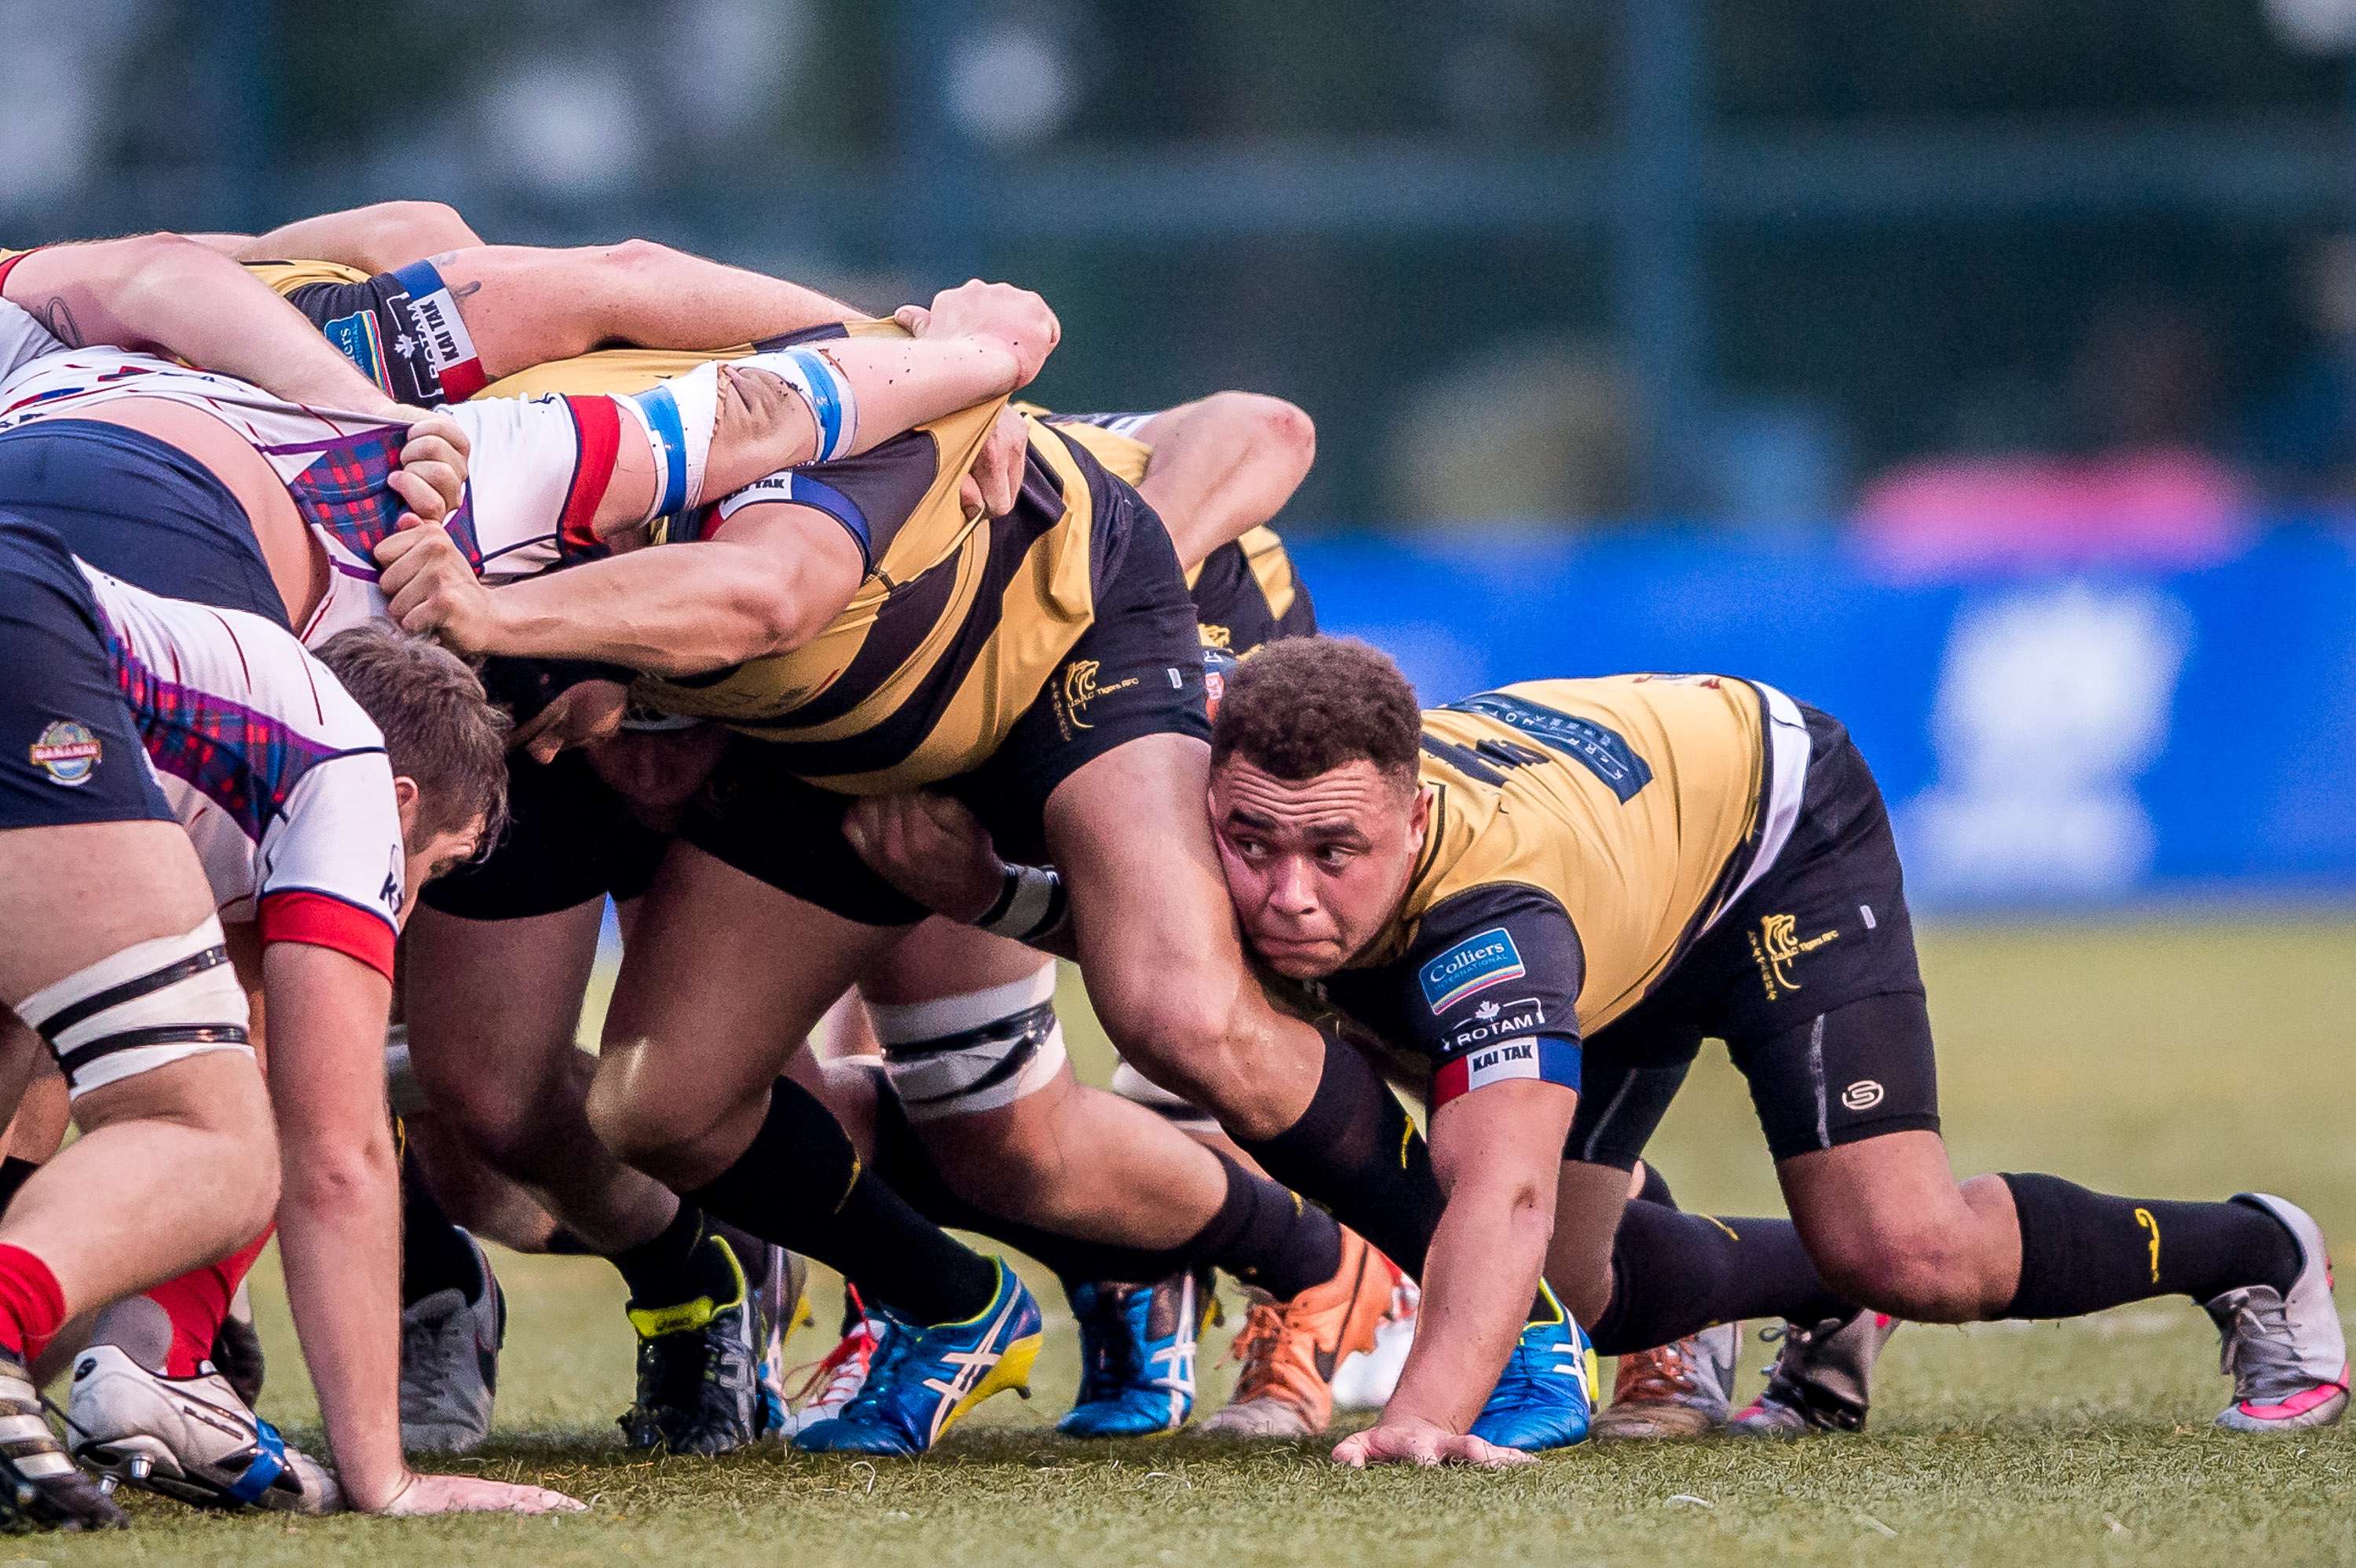 Alex Woodburn engages in a scrum for Tigers in the Hong Kong Premiership this season. Photos: HKRU